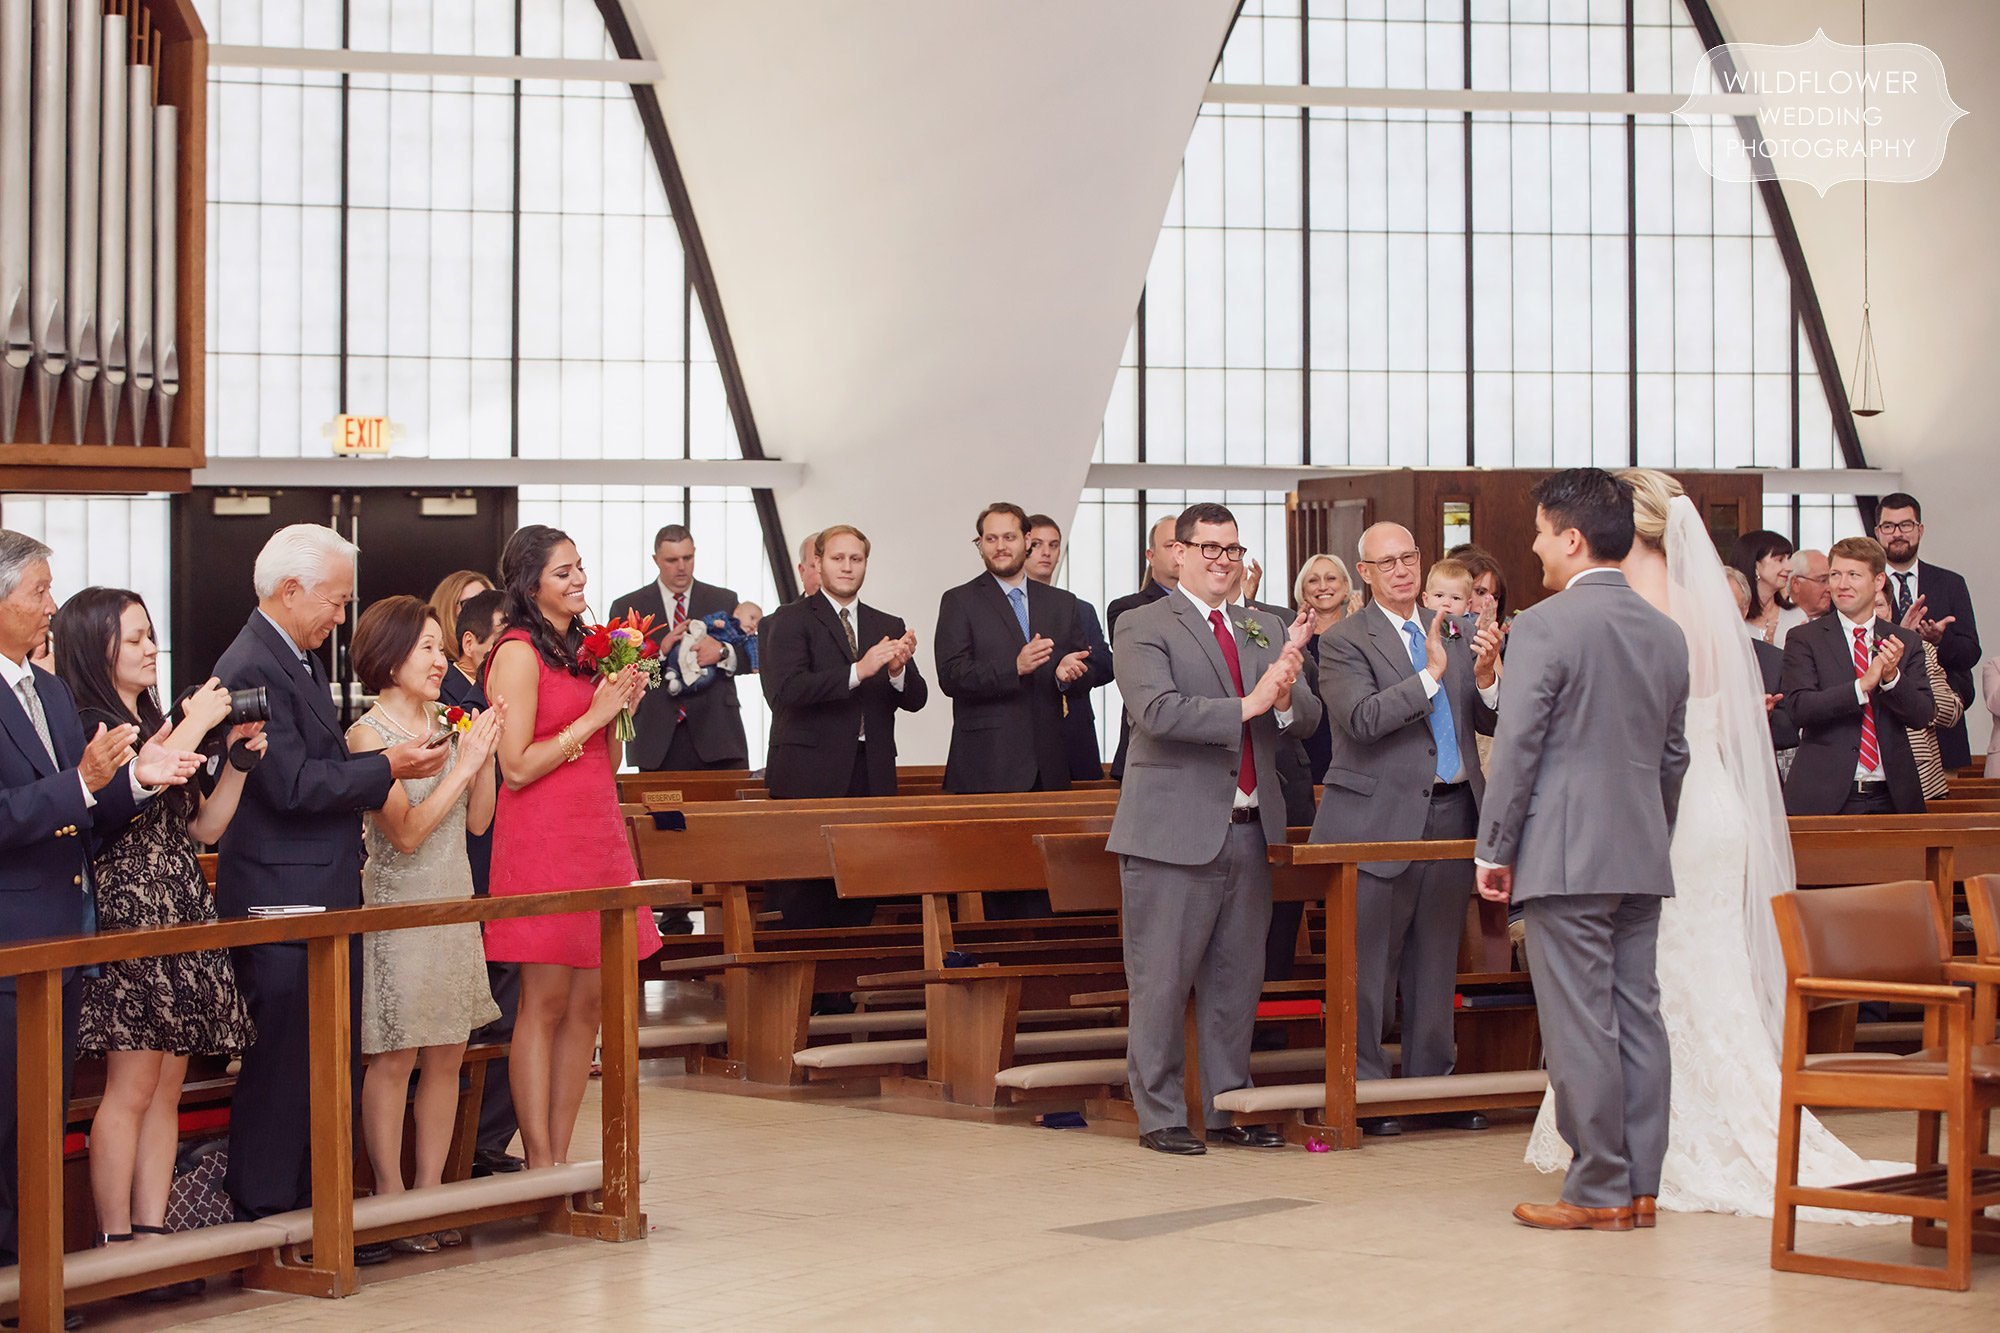 Wedding guests clap during this Priory School ceremony.